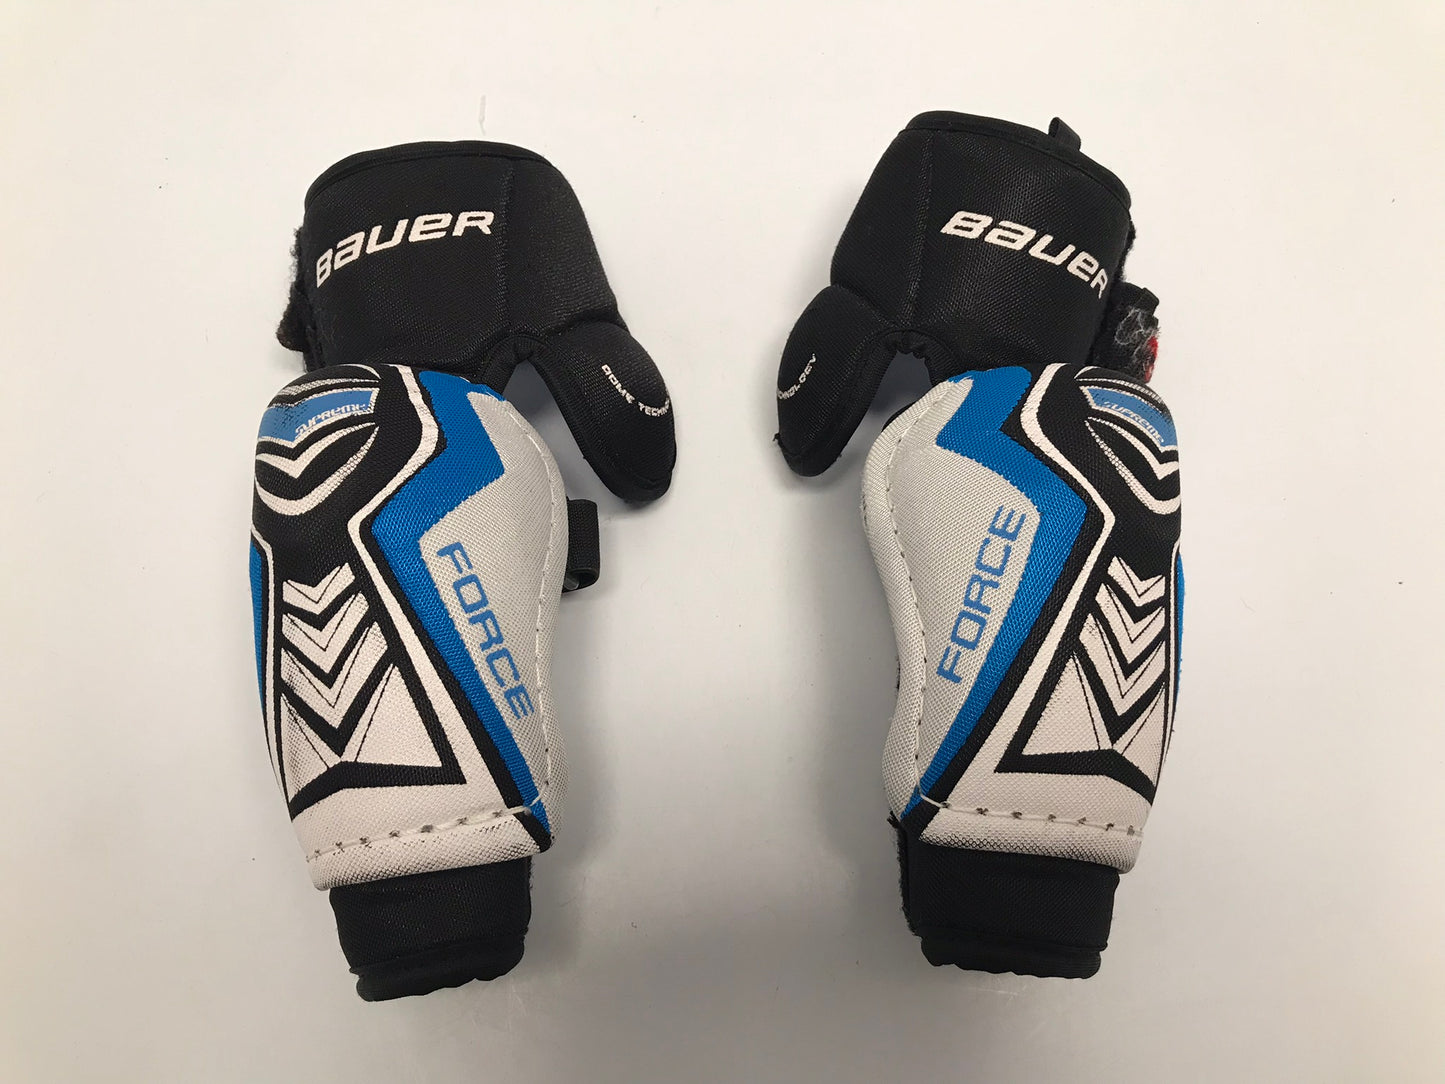 Hockey Elbow Pads Child Size Junior Small Bauer Blue White Black As New